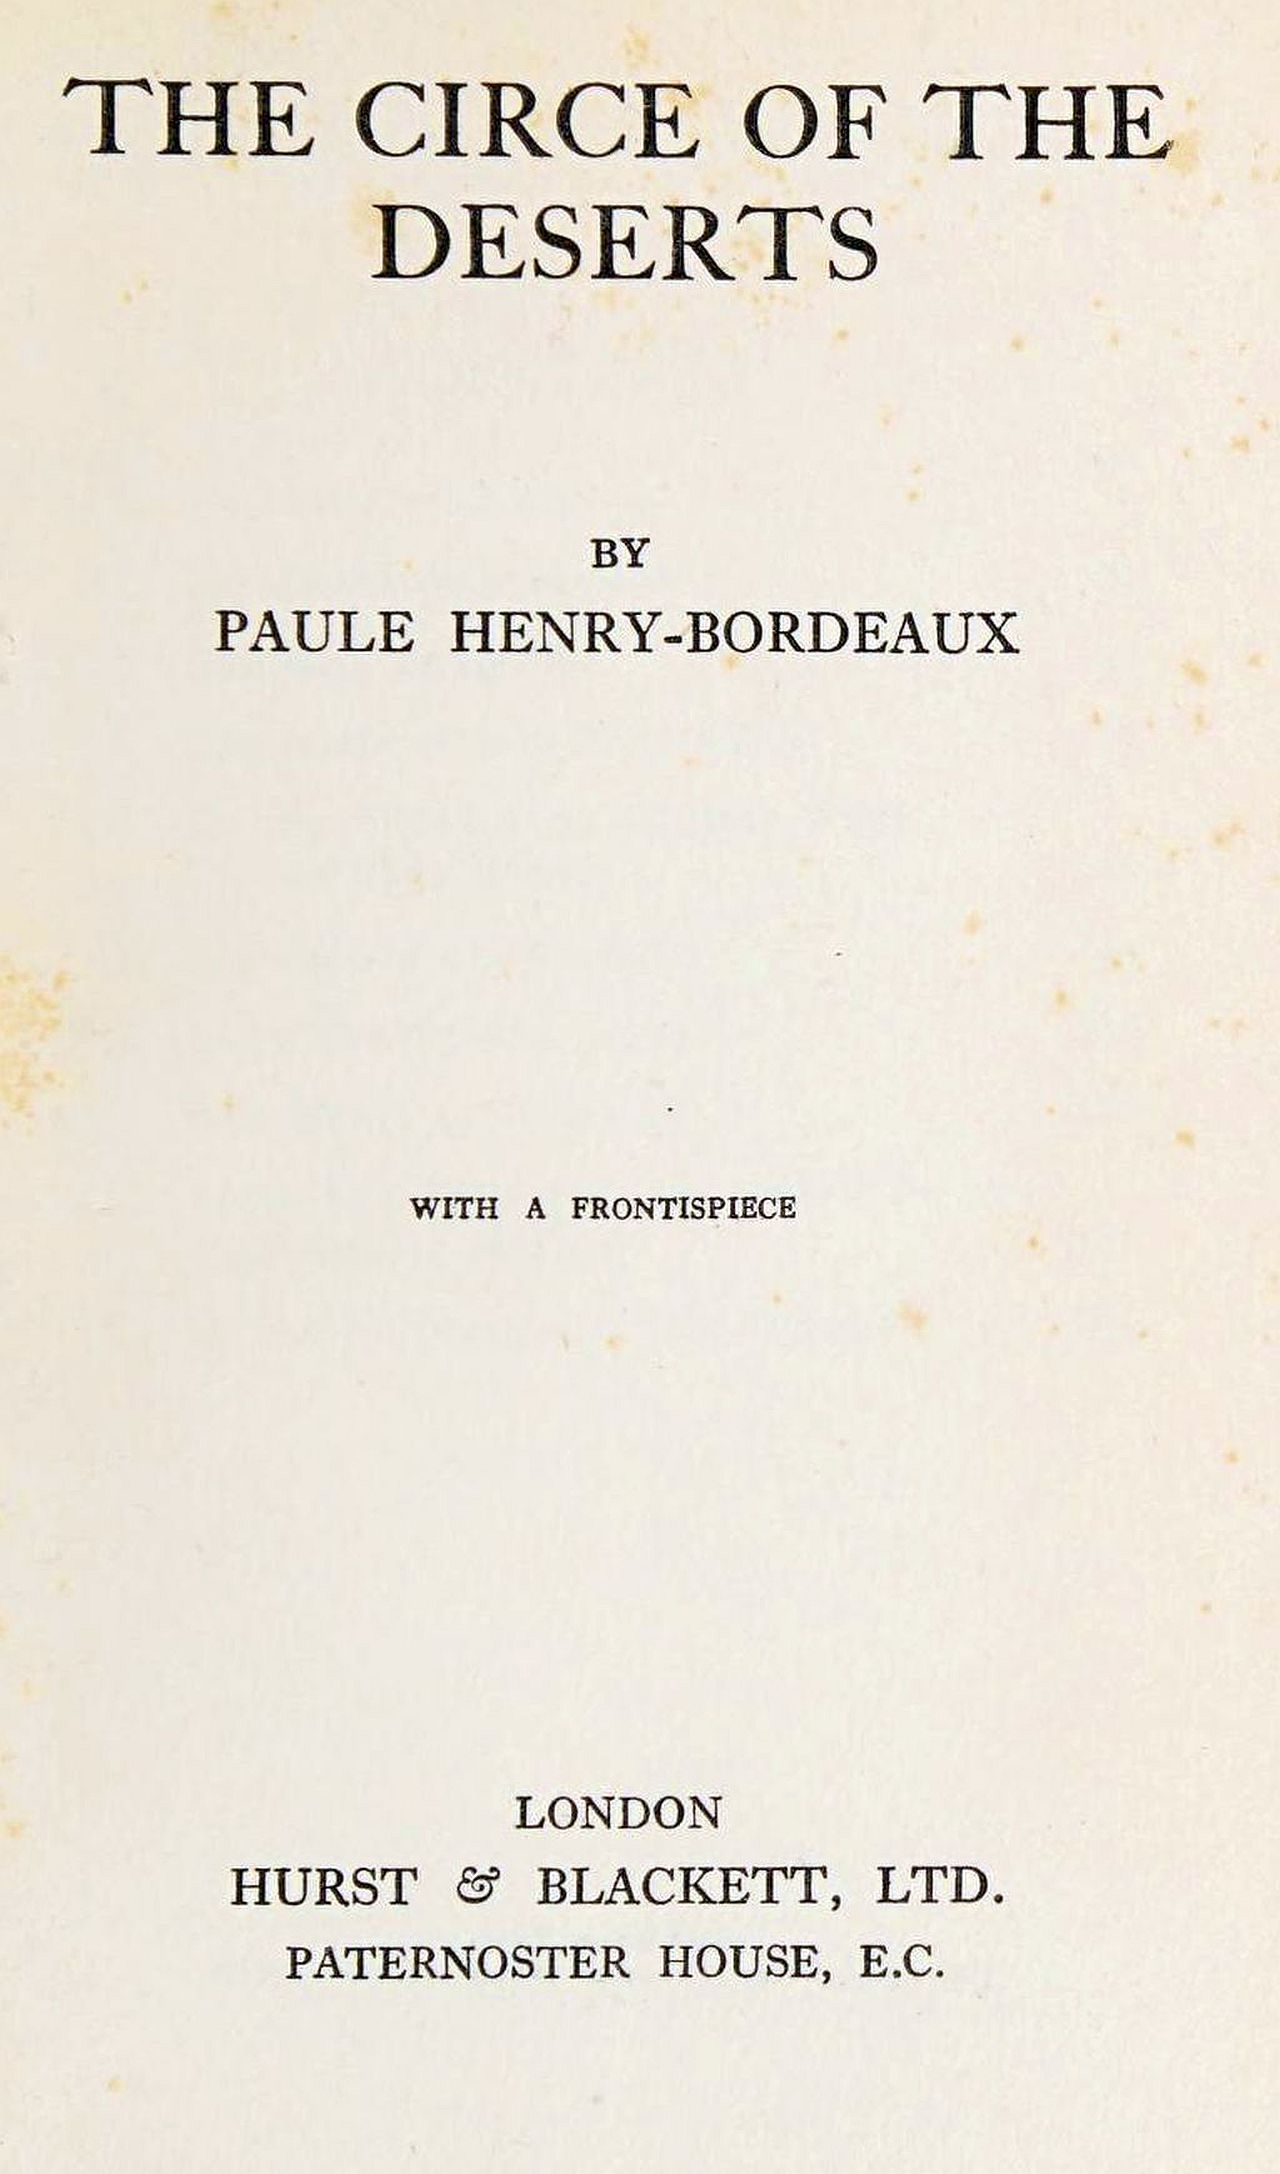 The Project Gutenberg eBook of The circe of the deserts, by Paule Henry-Bordeaux. picture